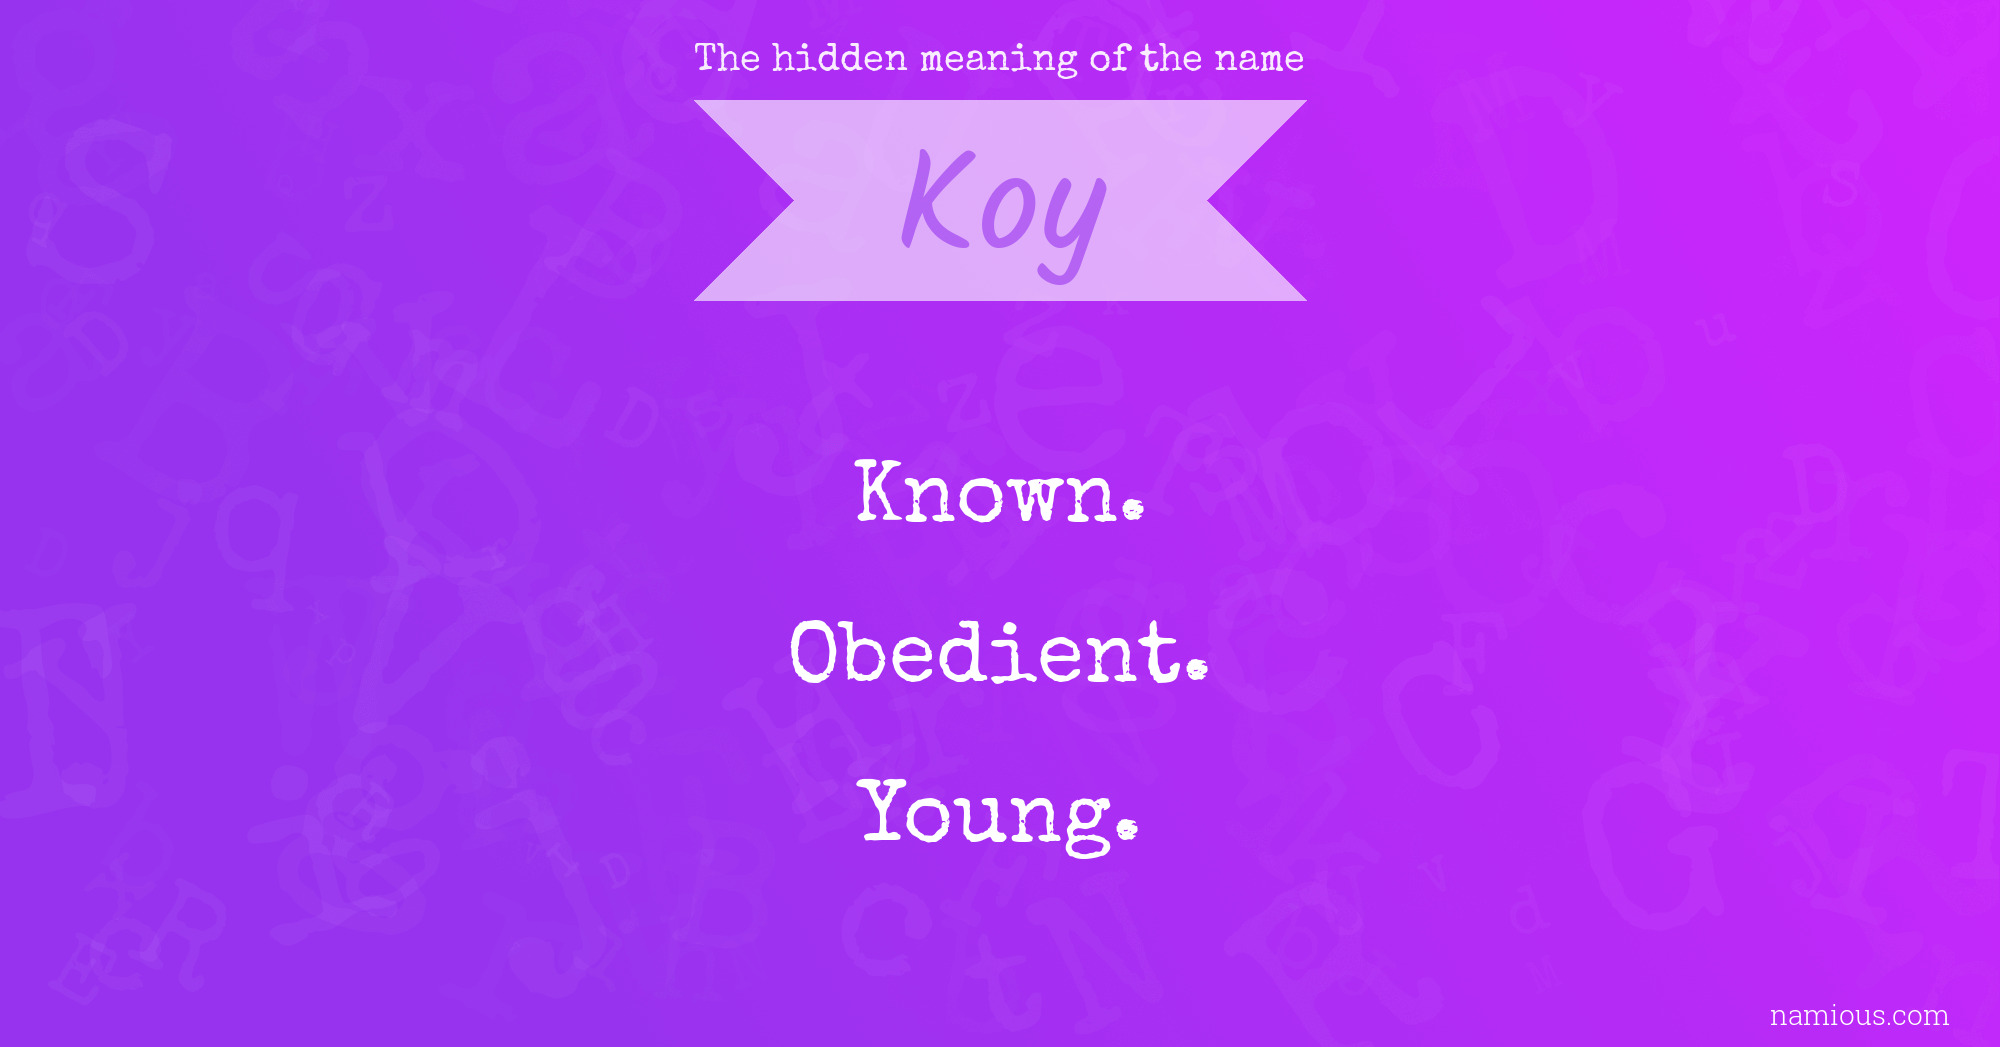 The hidden meaning of the name Koy